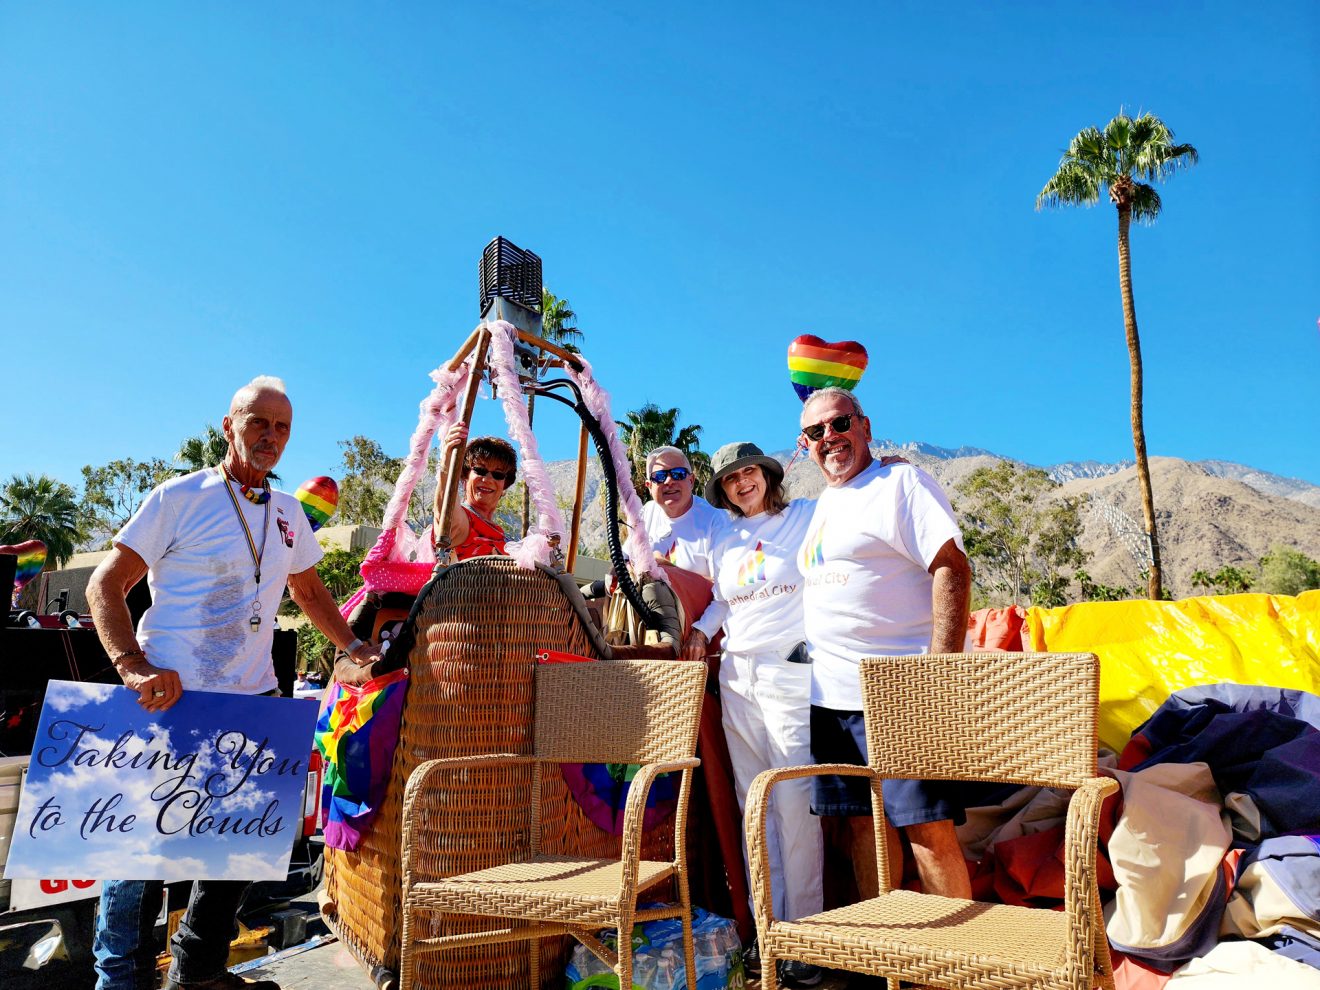 Cathedral City Takes Viewers to the Clouds for 2022 Palm Springs Pride Parade